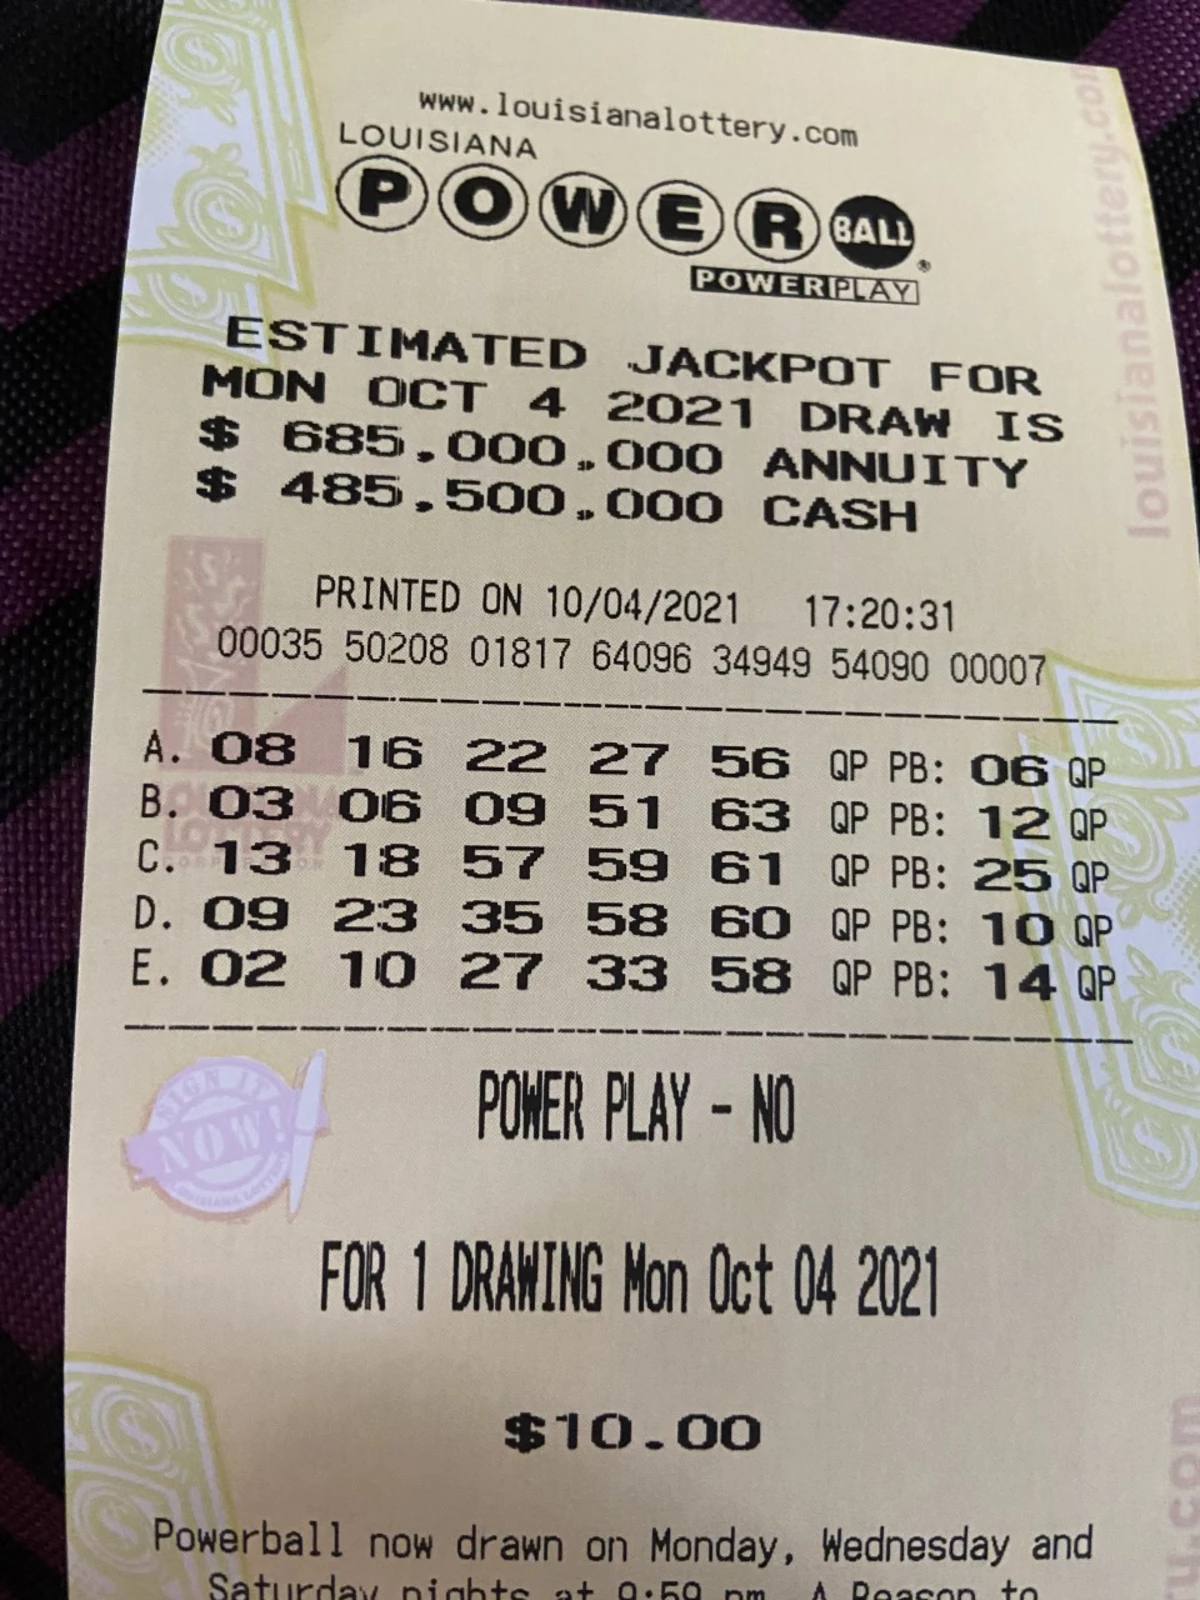 Lottery Ticket Holder Thanks A Lotto - Party Peanut